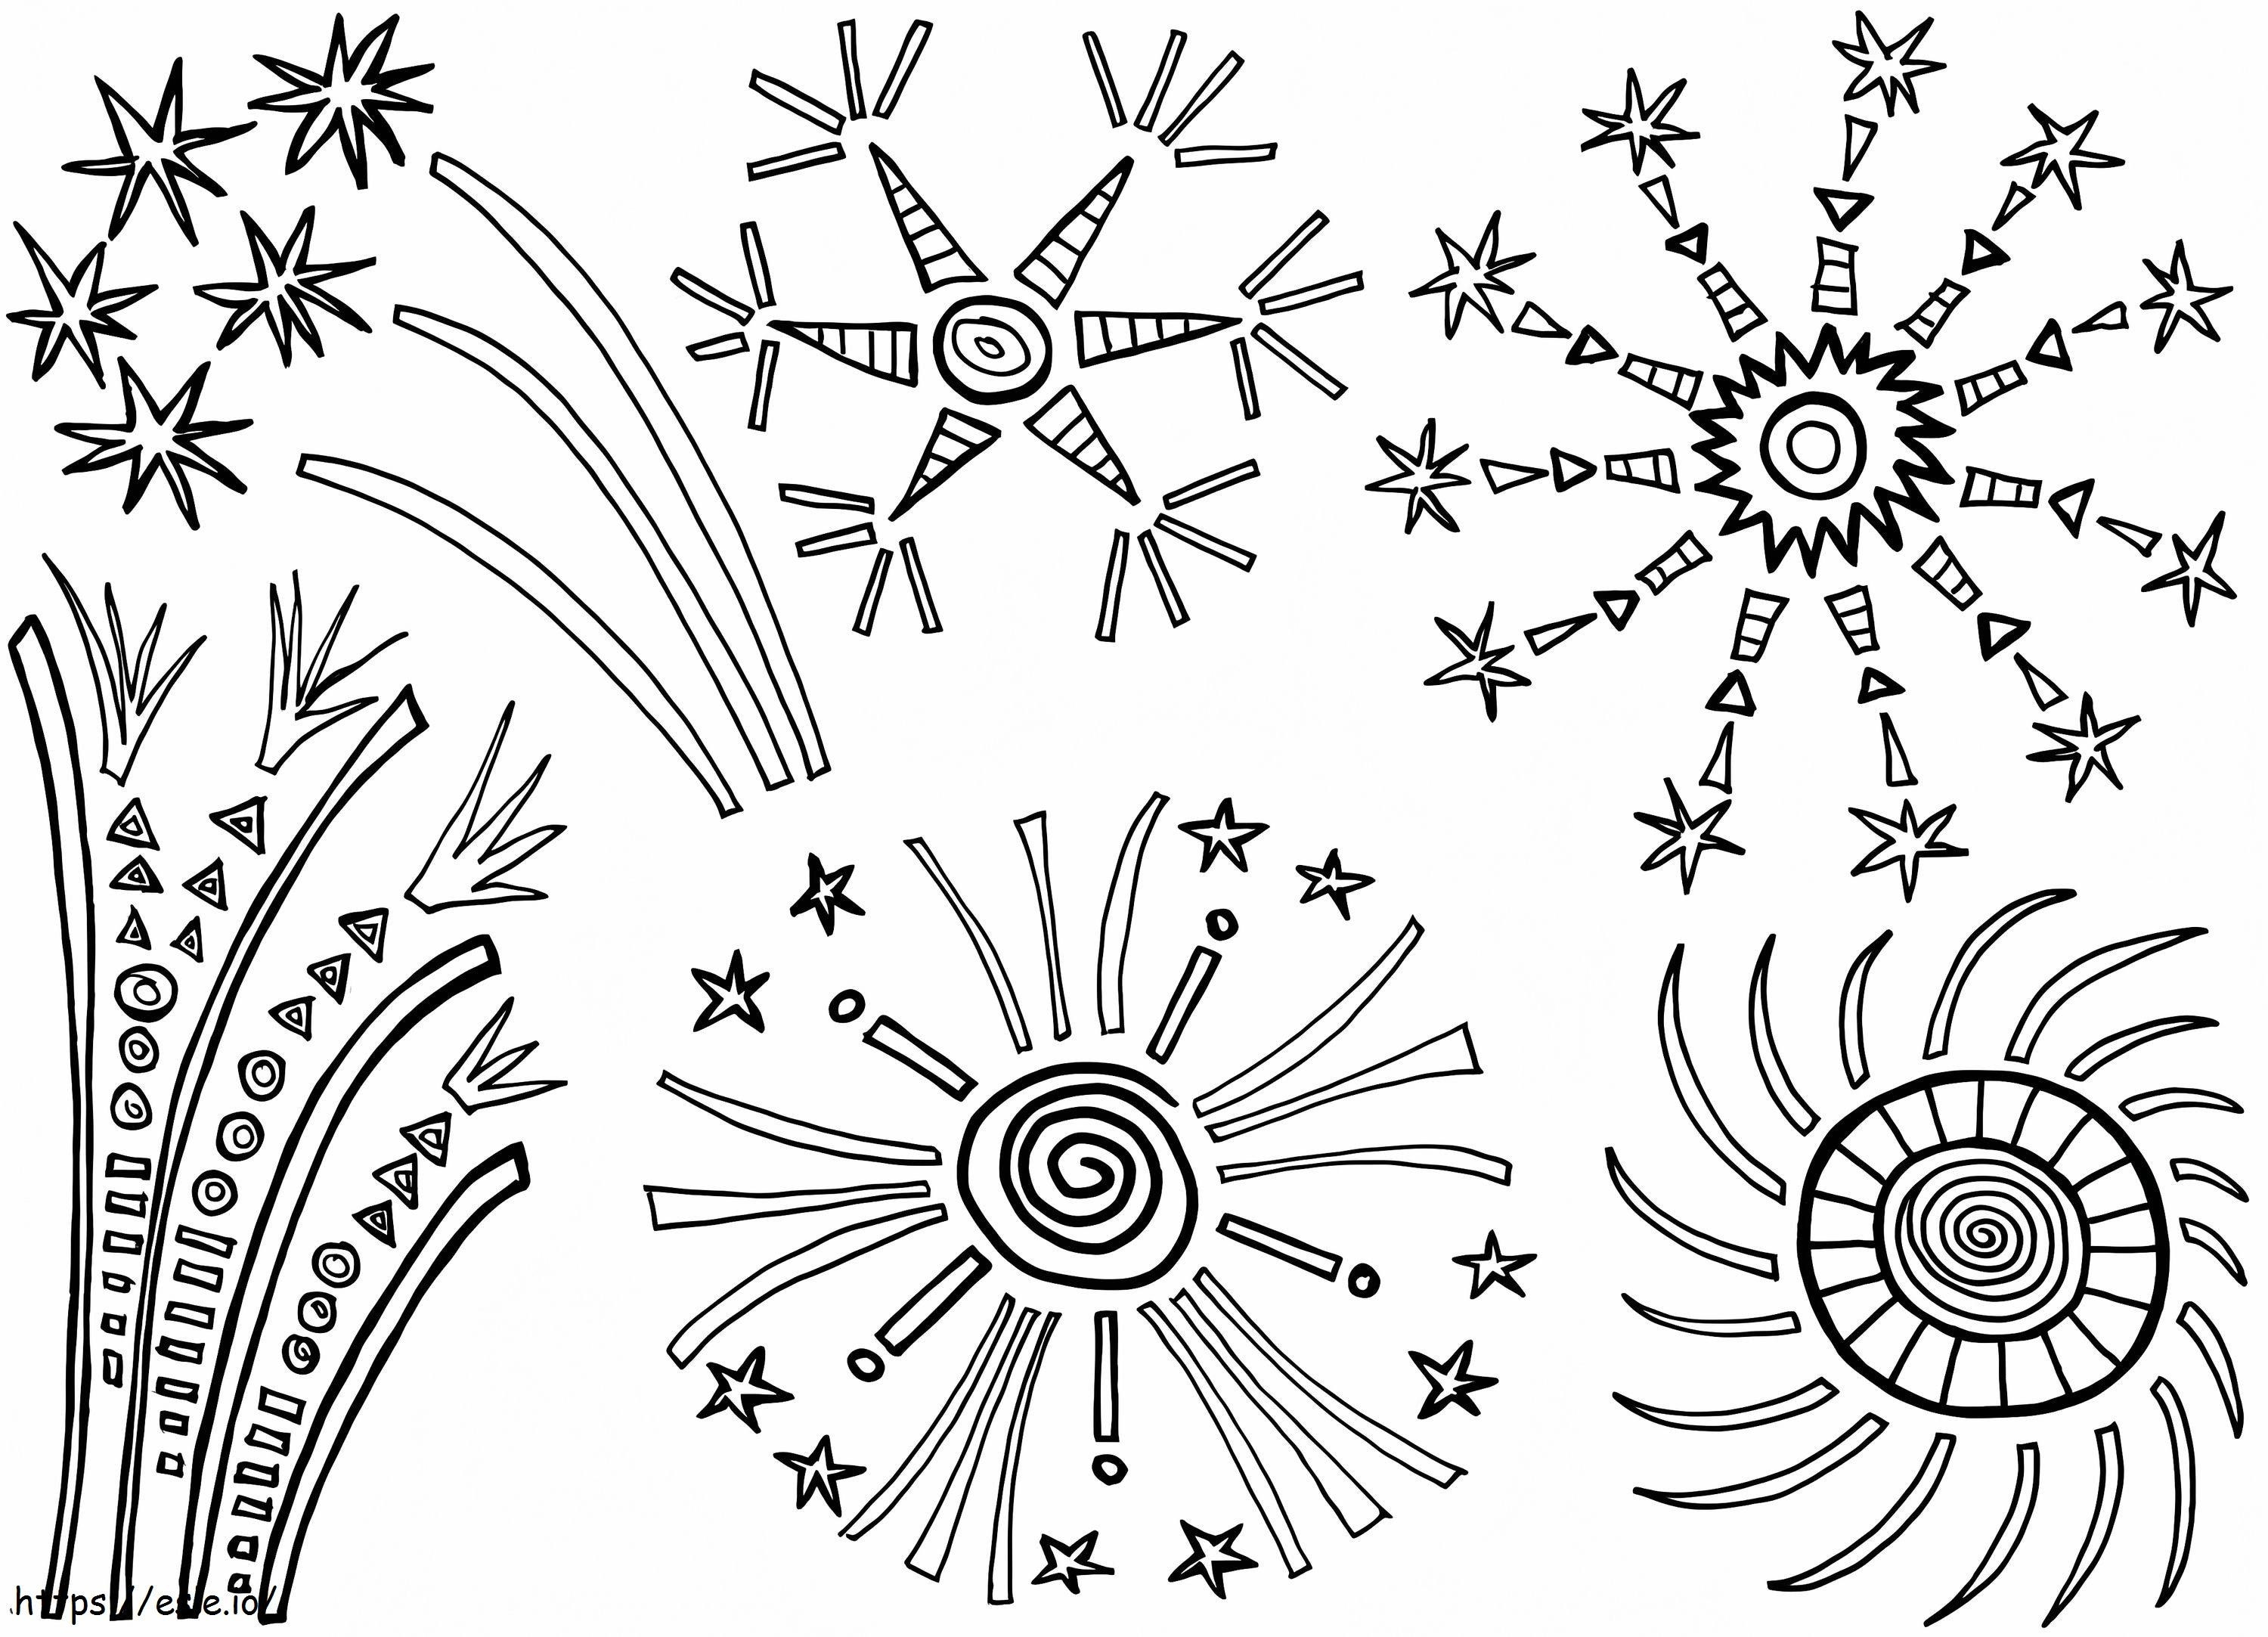 Fireworks 2 coloring page